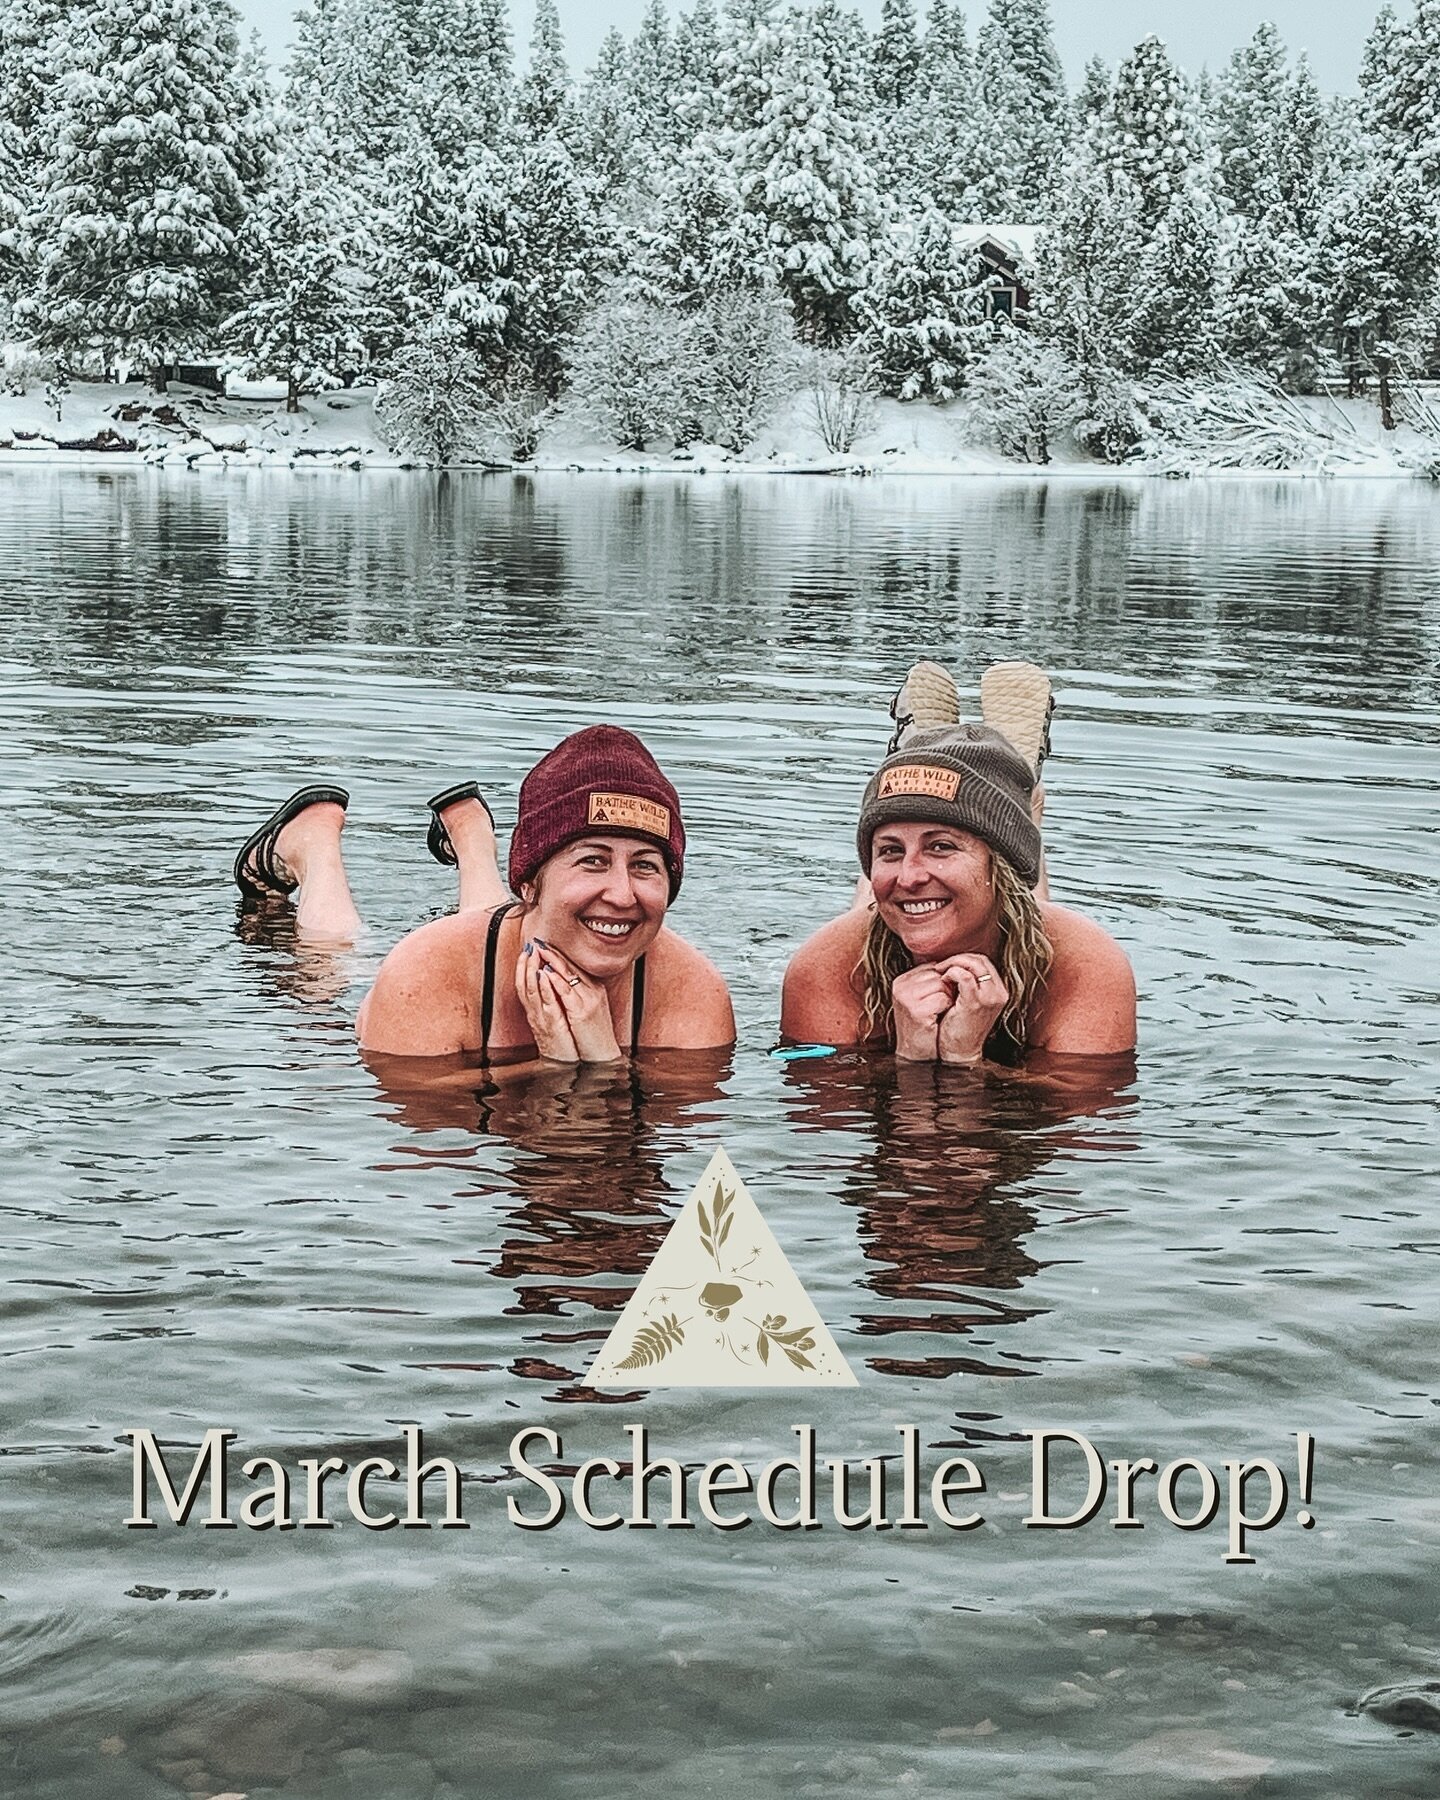 The March schedule is LIVE! Book &lsquo;em while we&rsquo;ve got &lsquo;em! 
🔥
We&rsquo;ll be adding a few more special sauna sessions for March next week so keep your eye out for those! 
🔥
We&rsquo;ll be releasing the April schedule in mid-March a